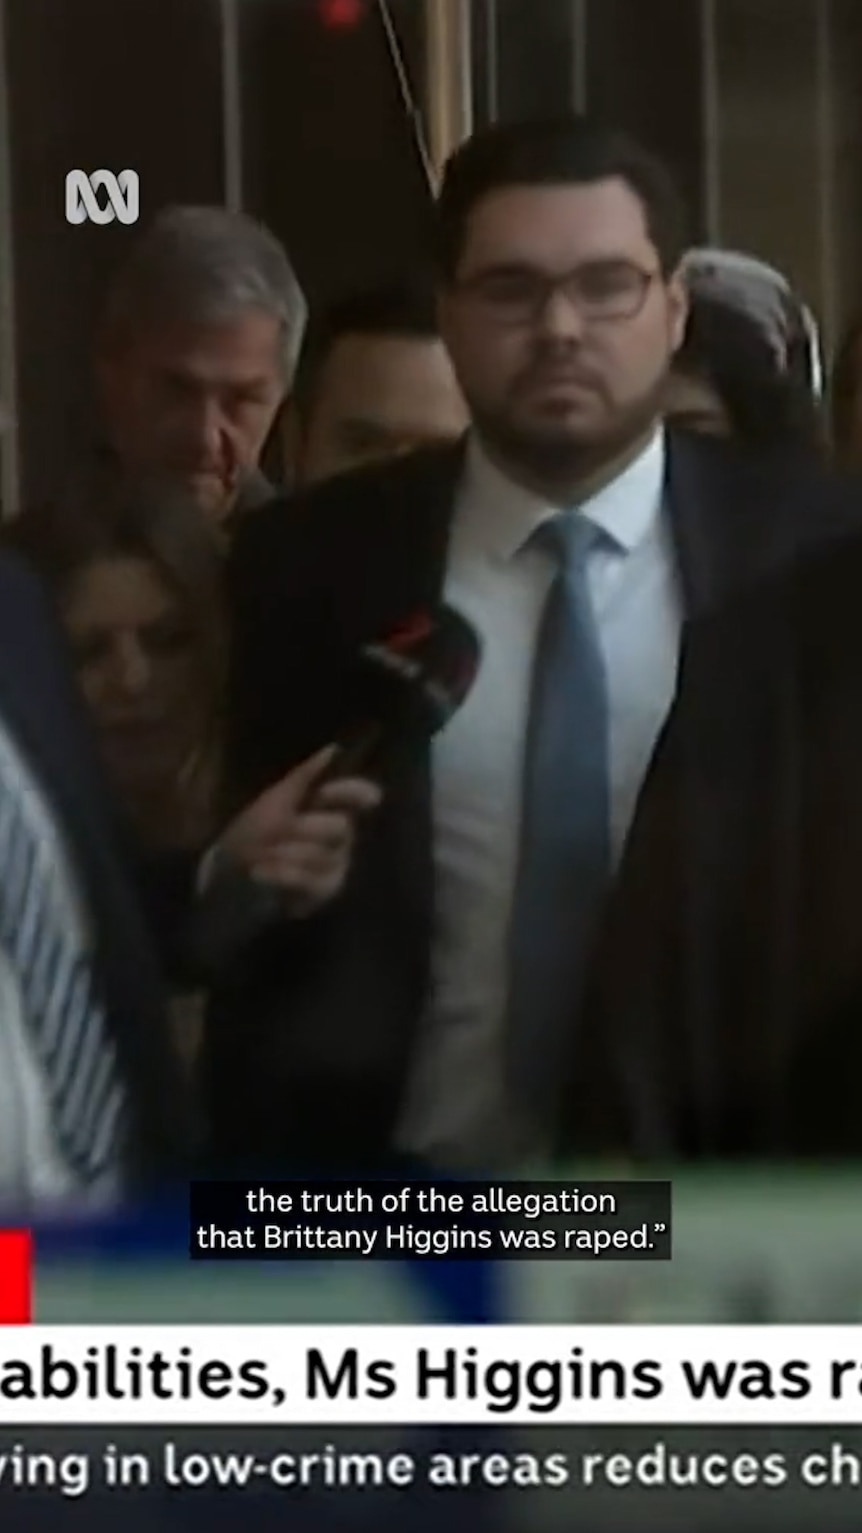 Man walks unsmiling while surrounded by journalists with microphones and cameras